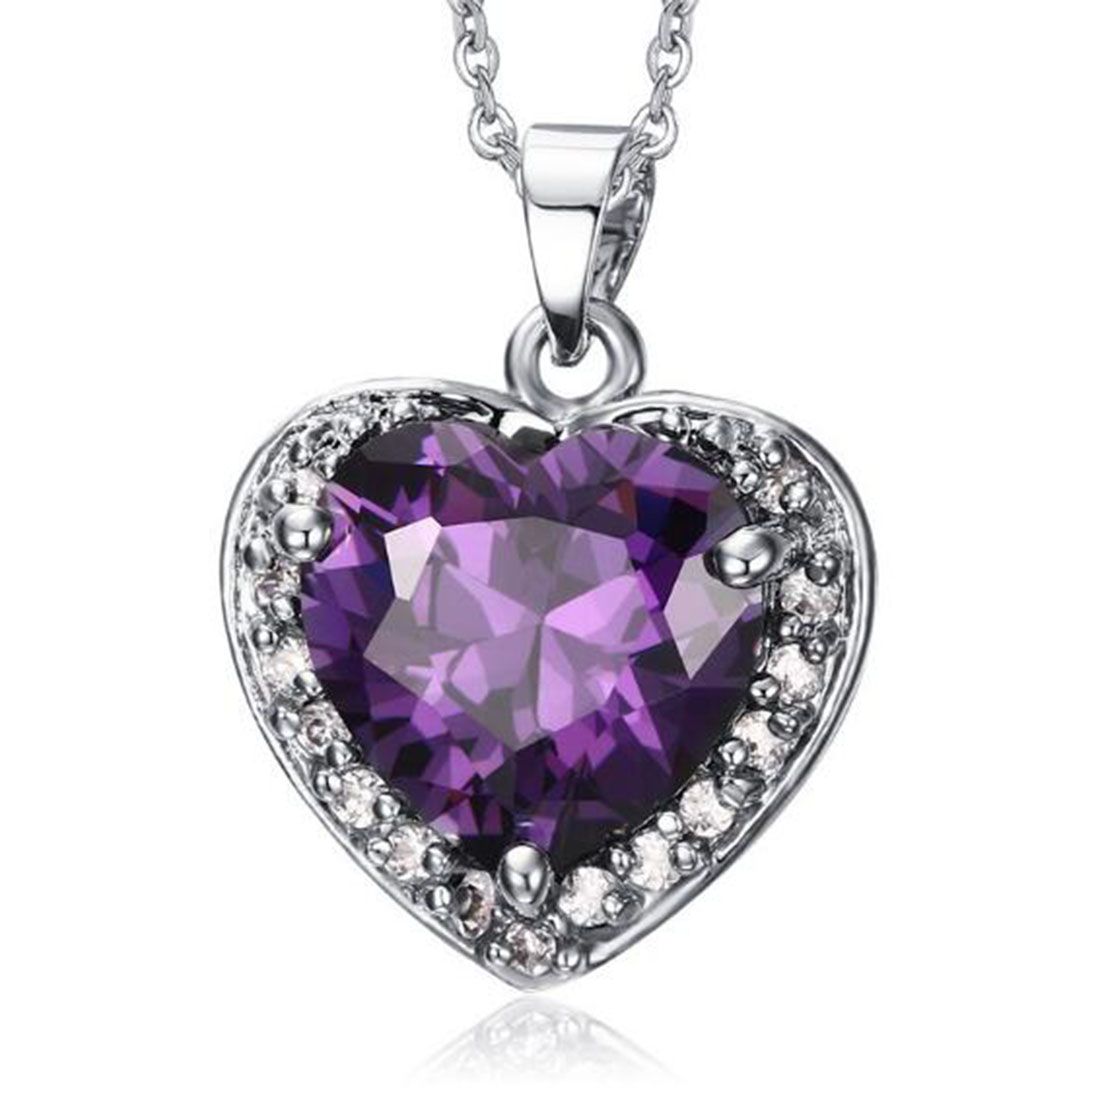 Wholesale Womens Love Heart Purple Crystal Pendant Necklace Sterling ...